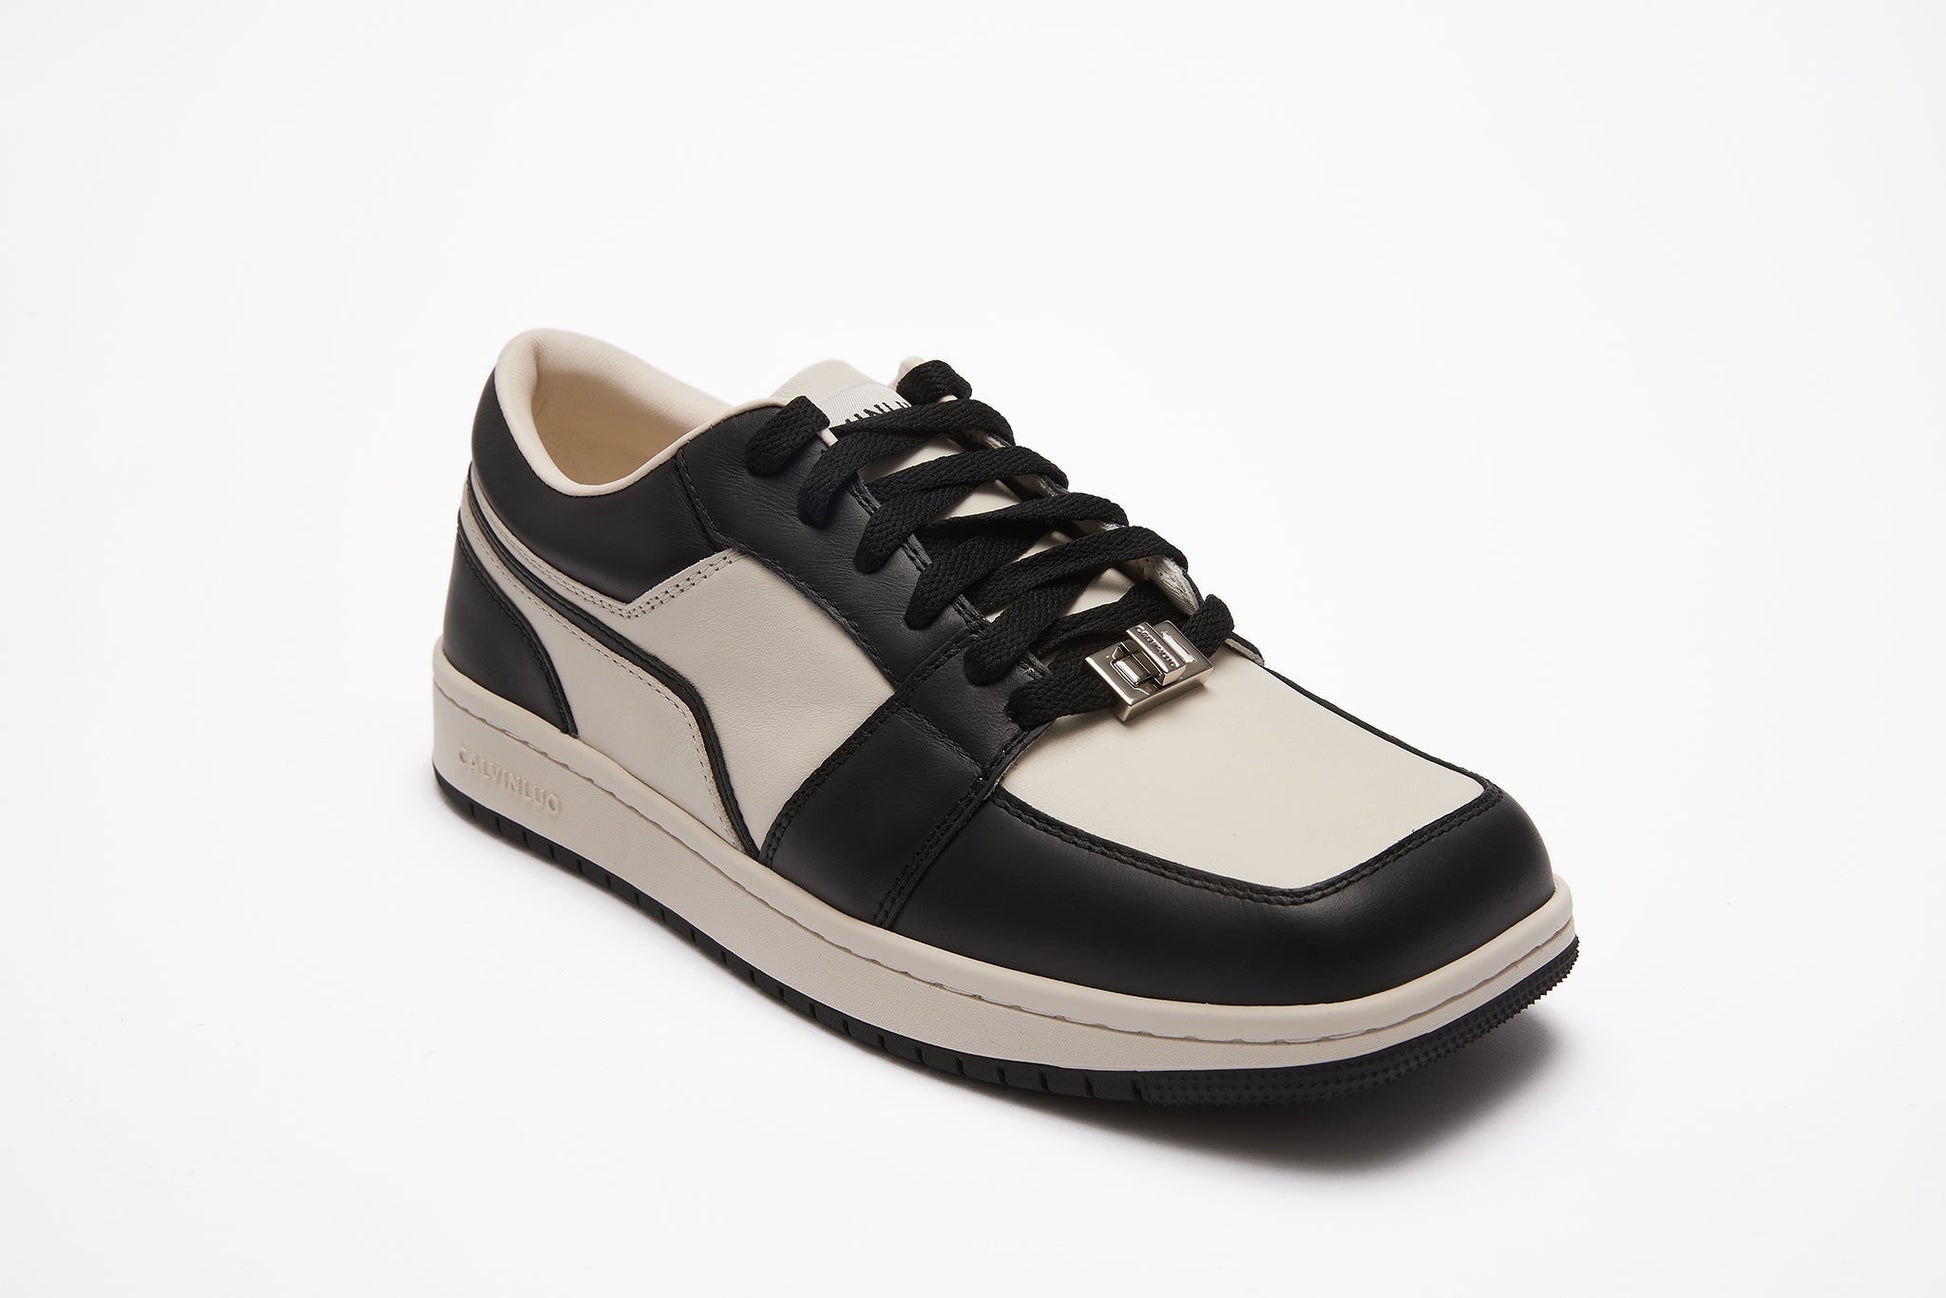 CALVIN LUO Black Square Toe Low Sneakers | MADA IN CHINA